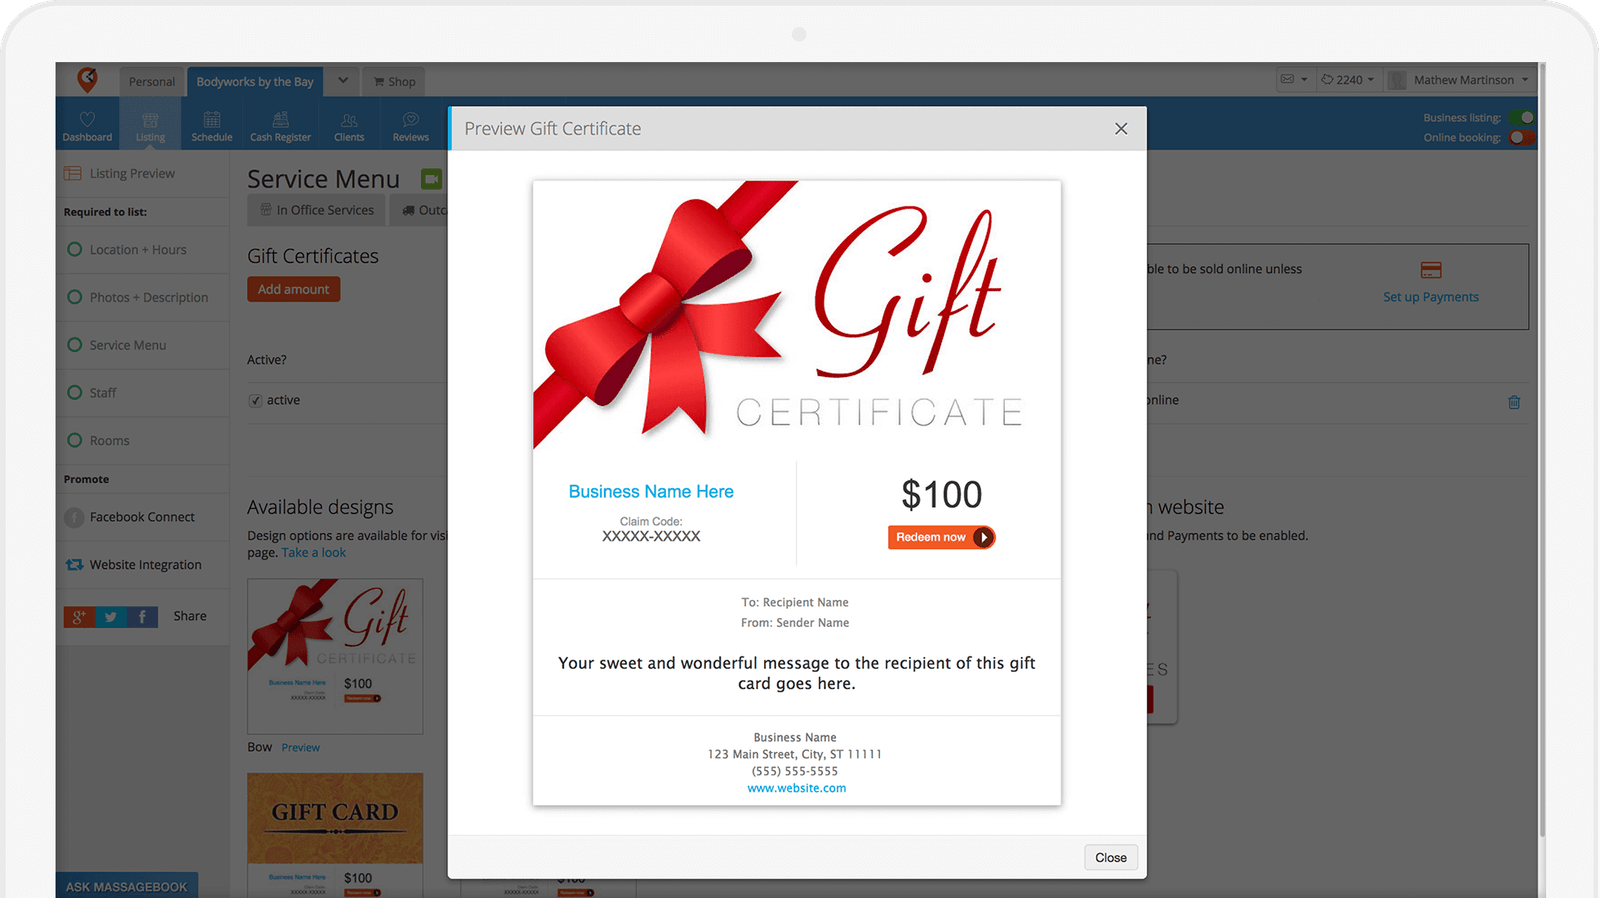 Best Massage Business Tools: MassageBook gives you the ability to sell gift certificates.